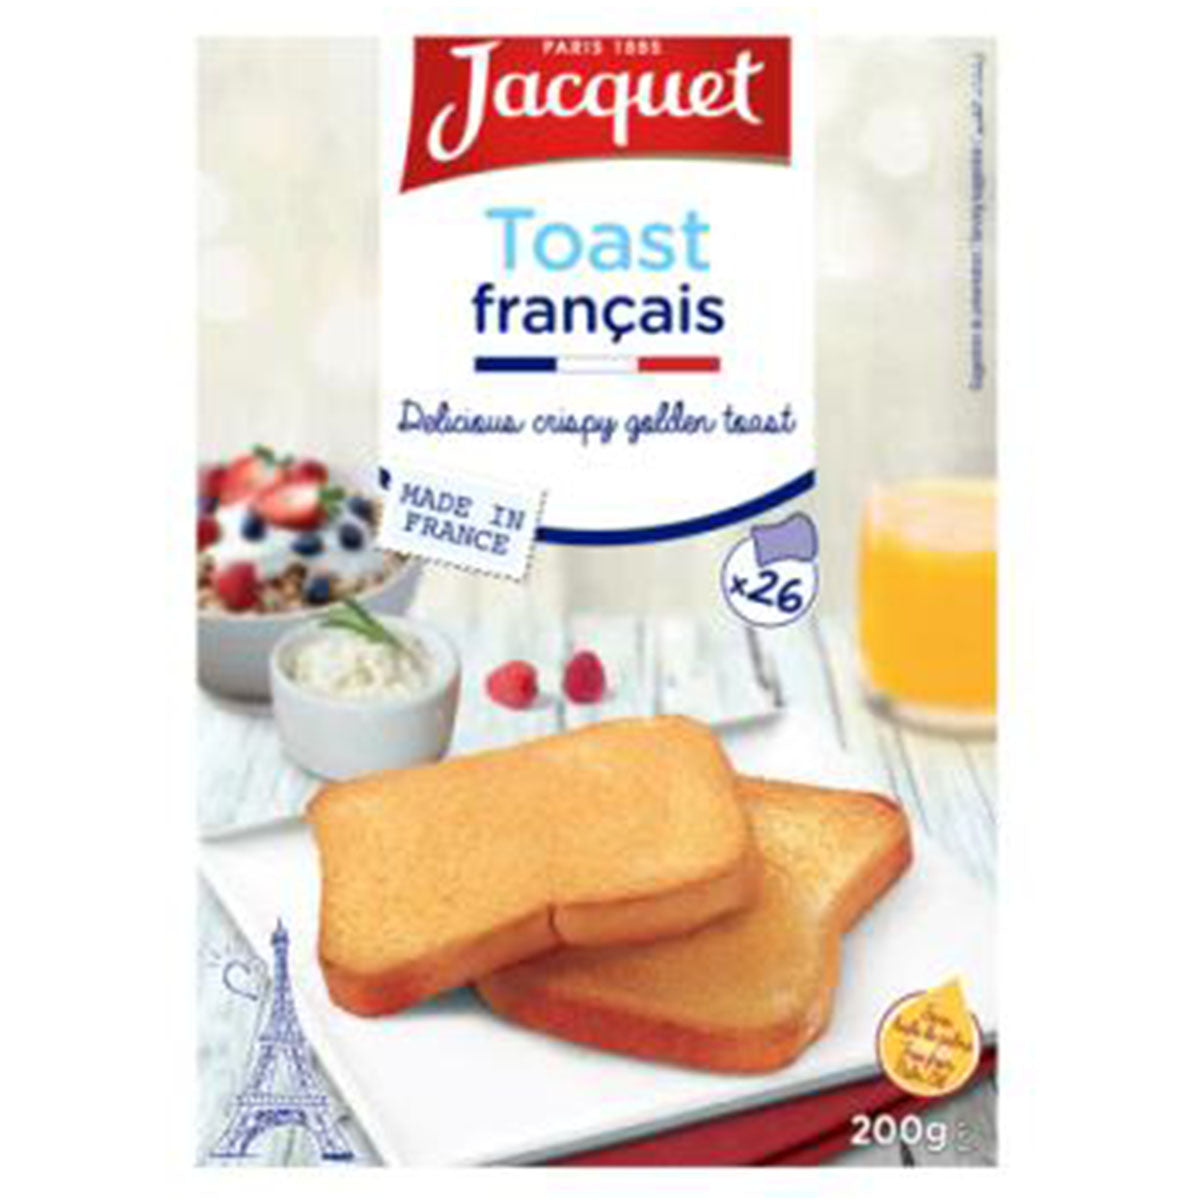 Jacquet - French Toast - 200g - Continental Food Store